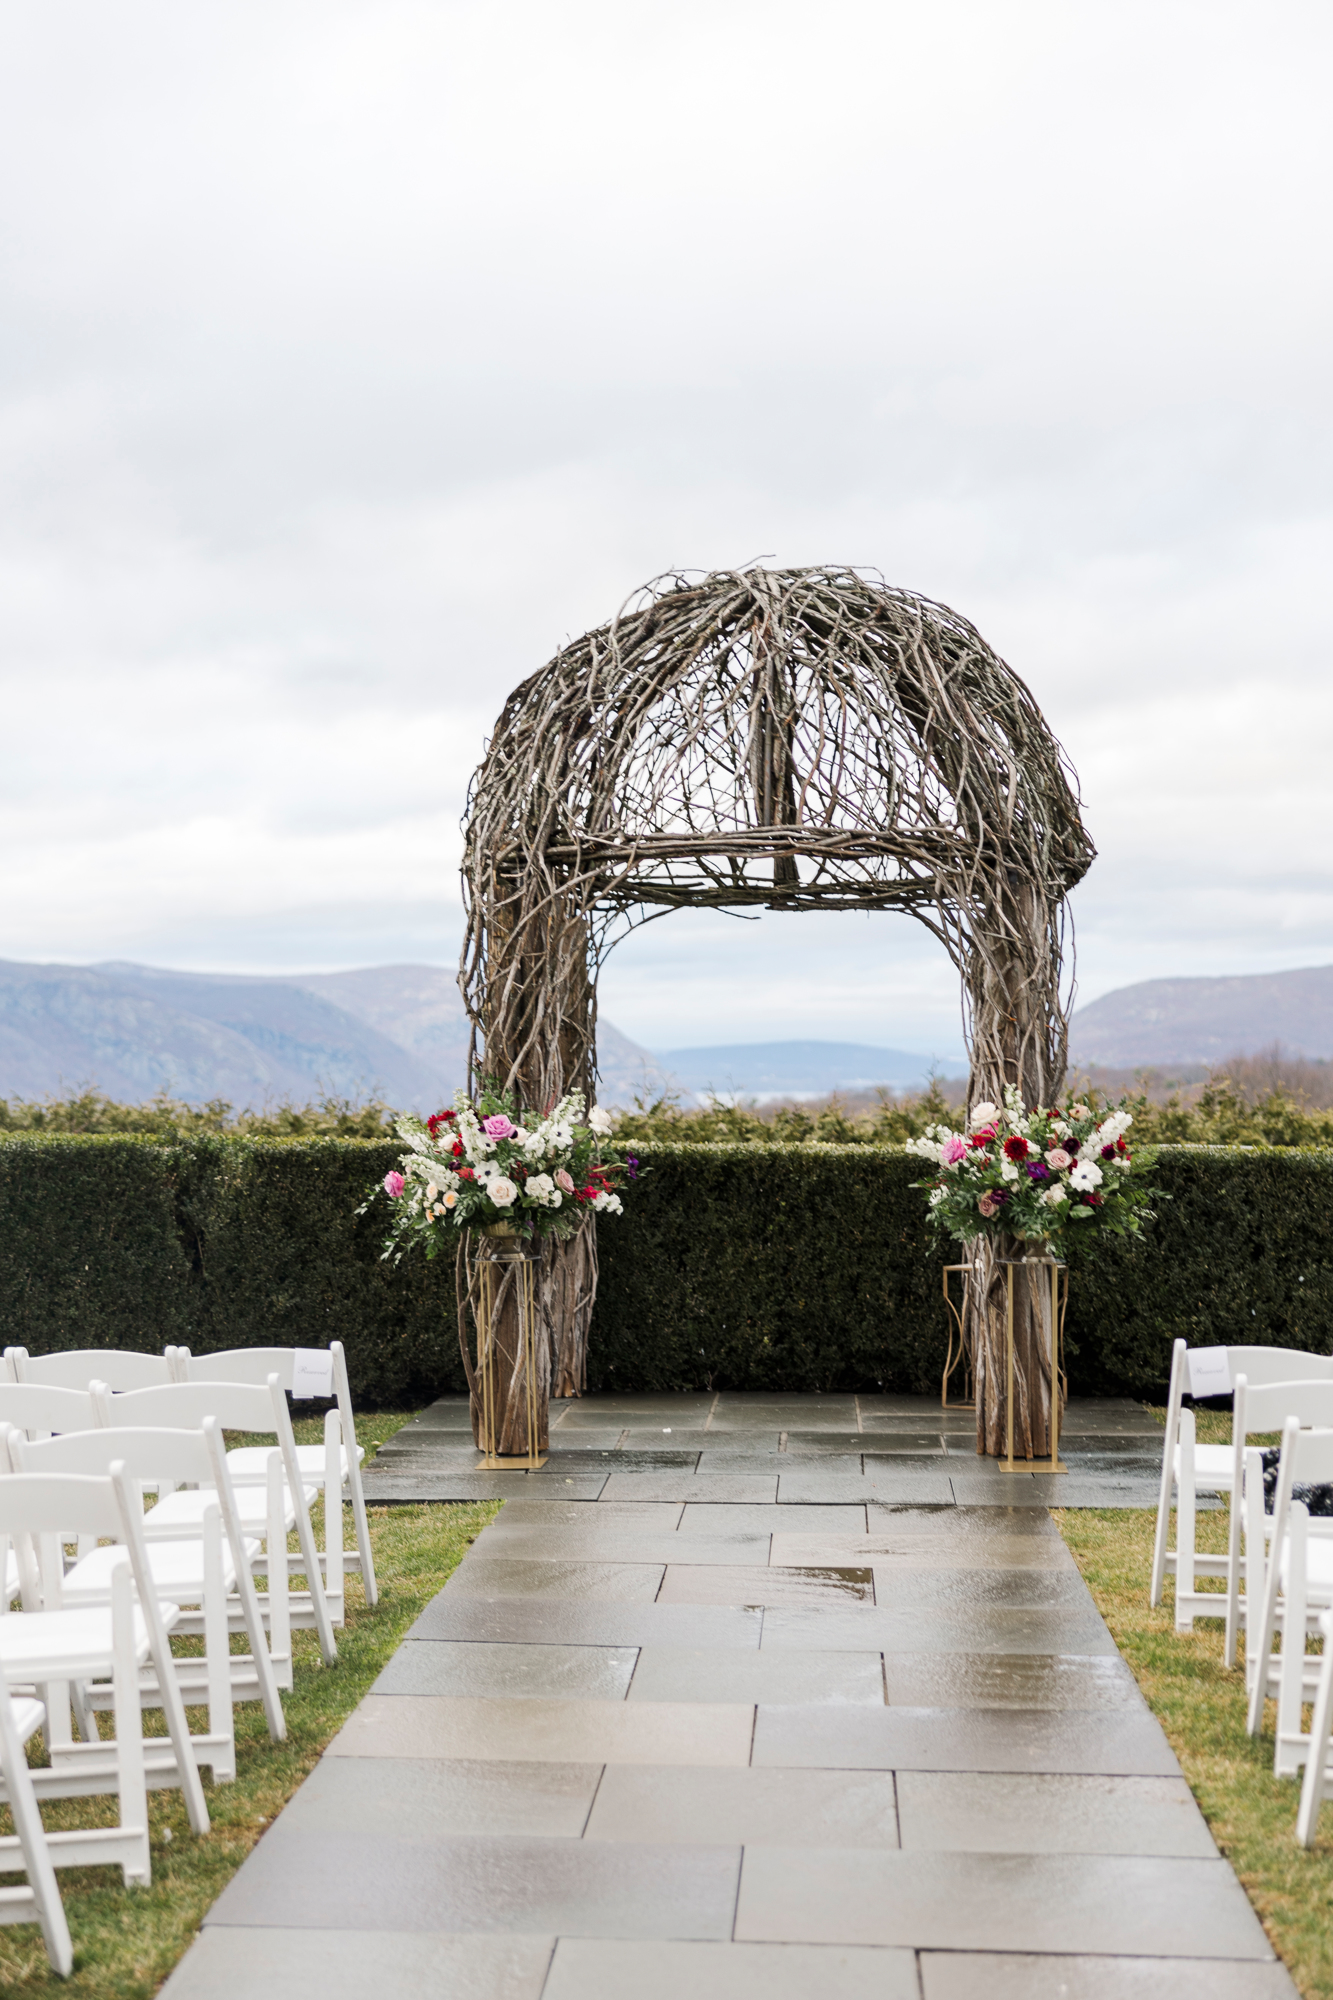 Incredible wedding photography at The Garrison, NY